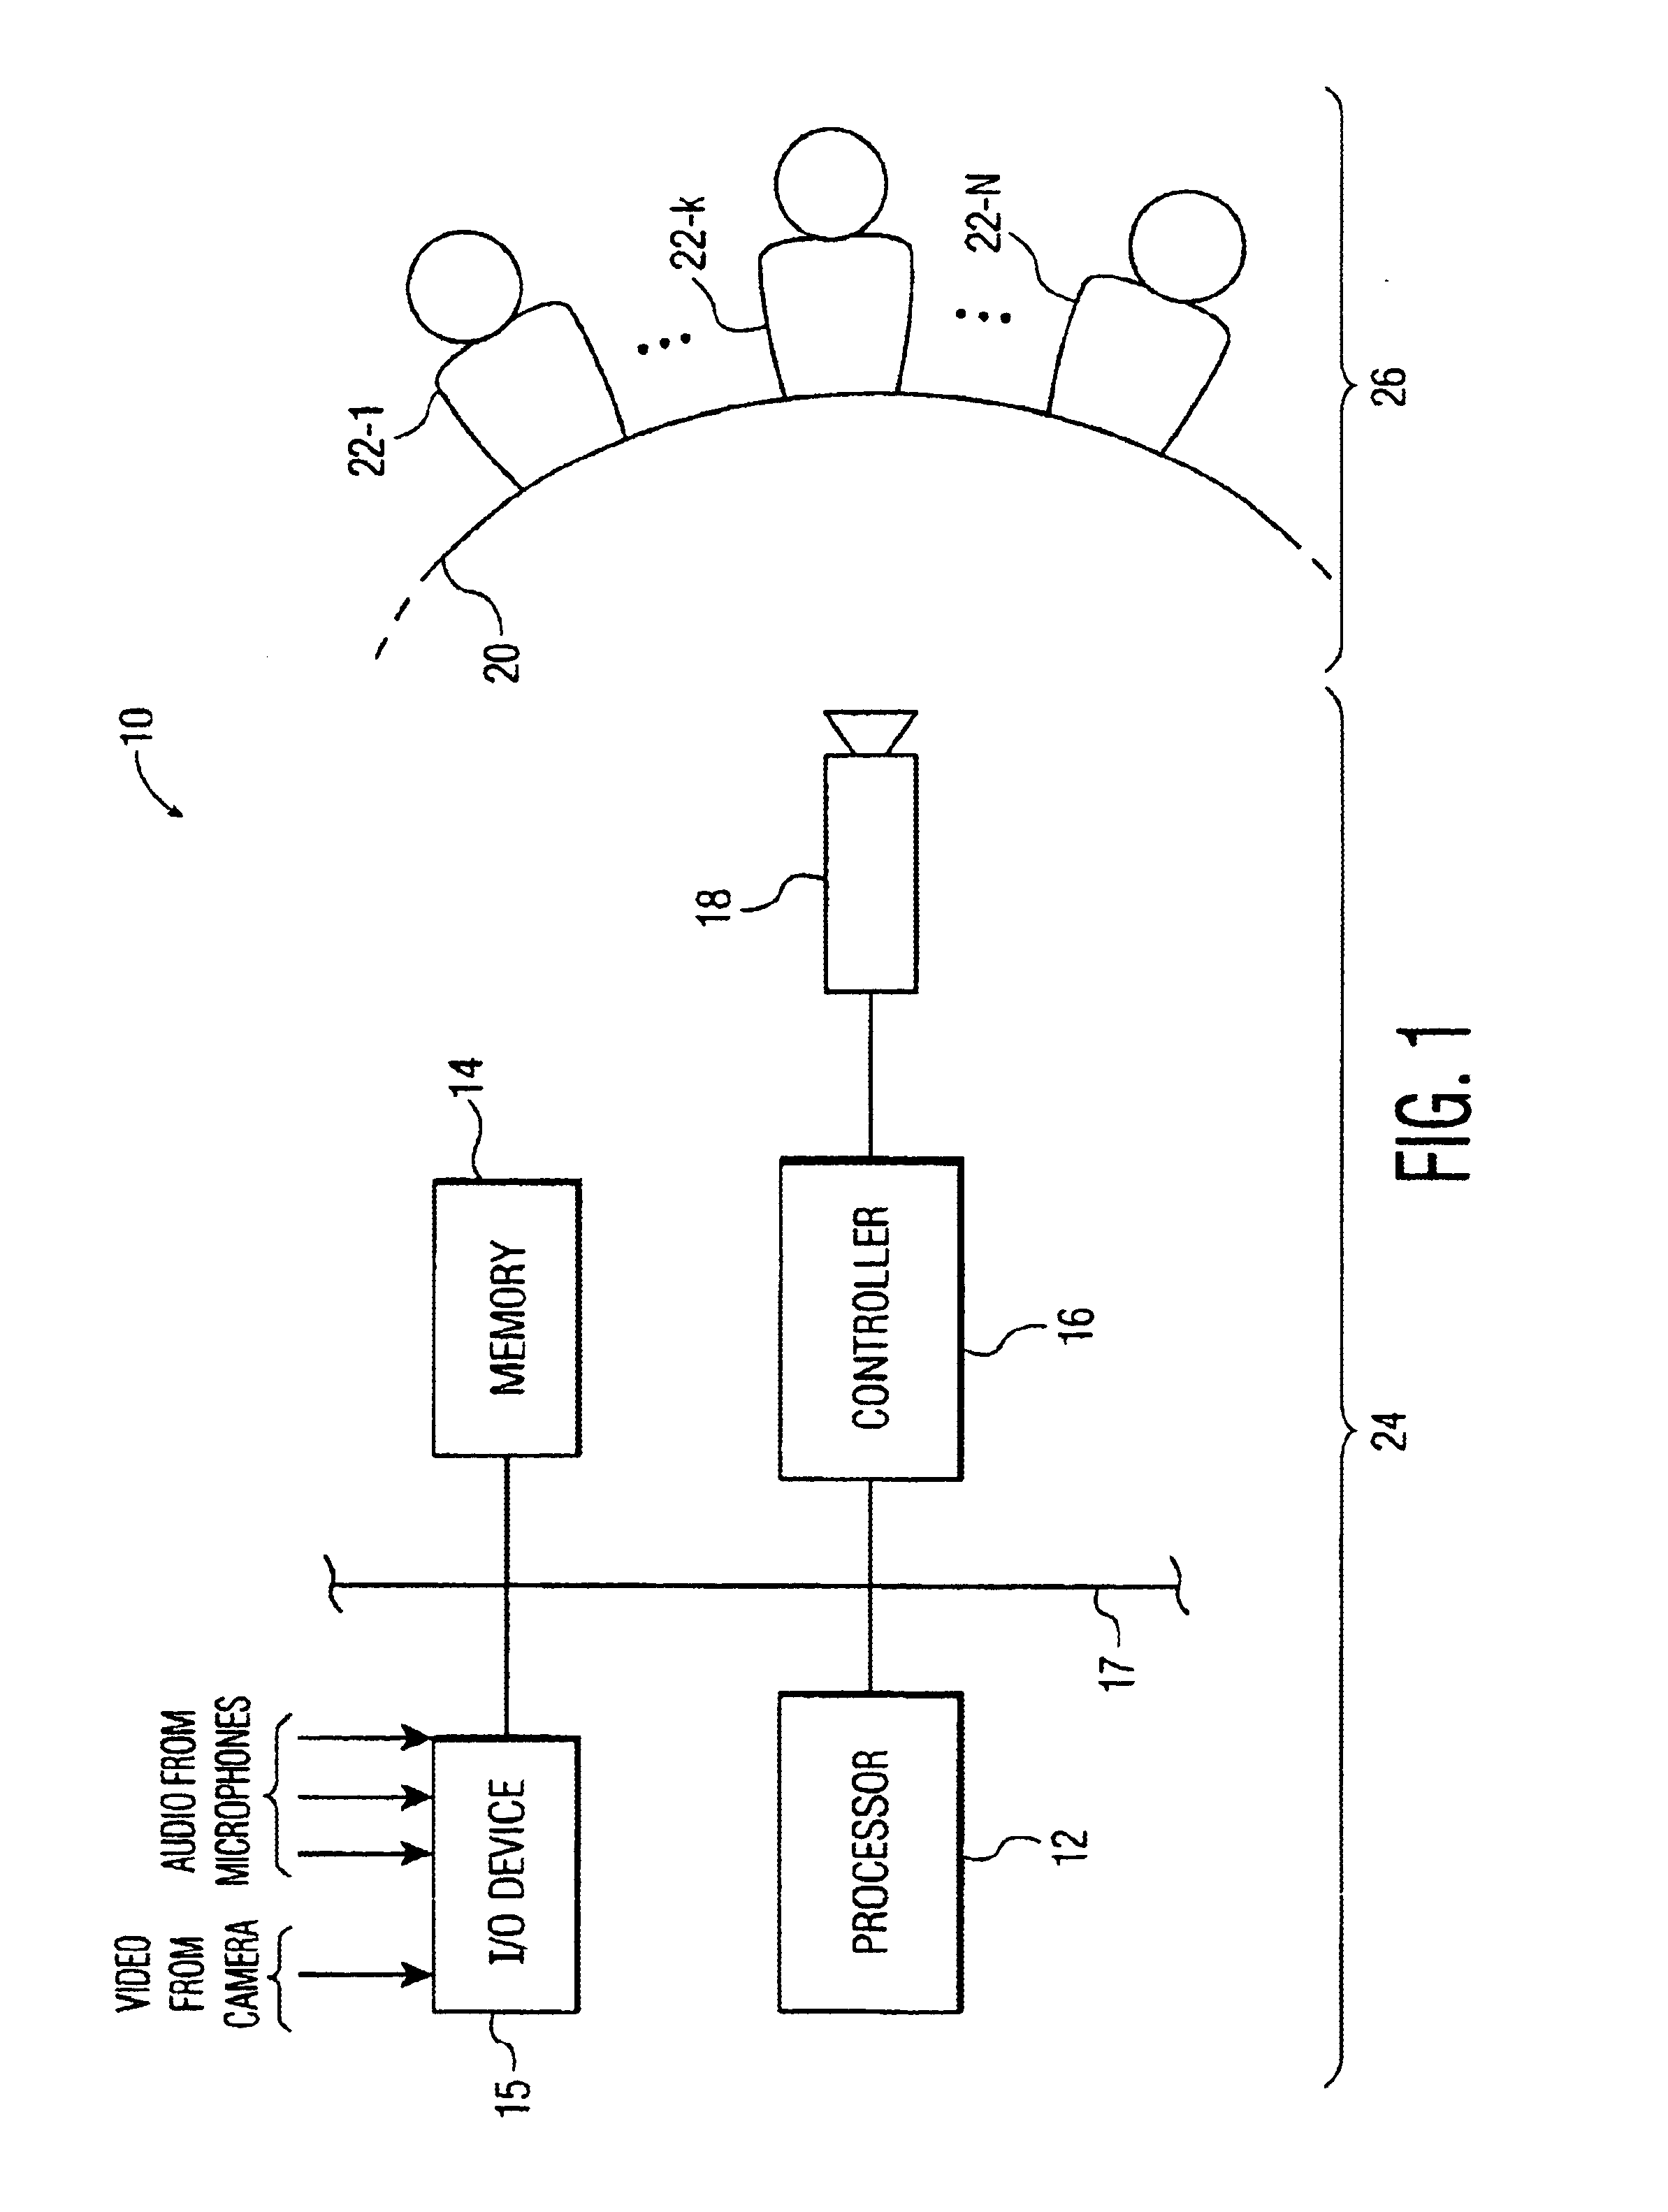 Method and apparatus for tracking moving objects using combined video and audio information in video conferencing and other applications